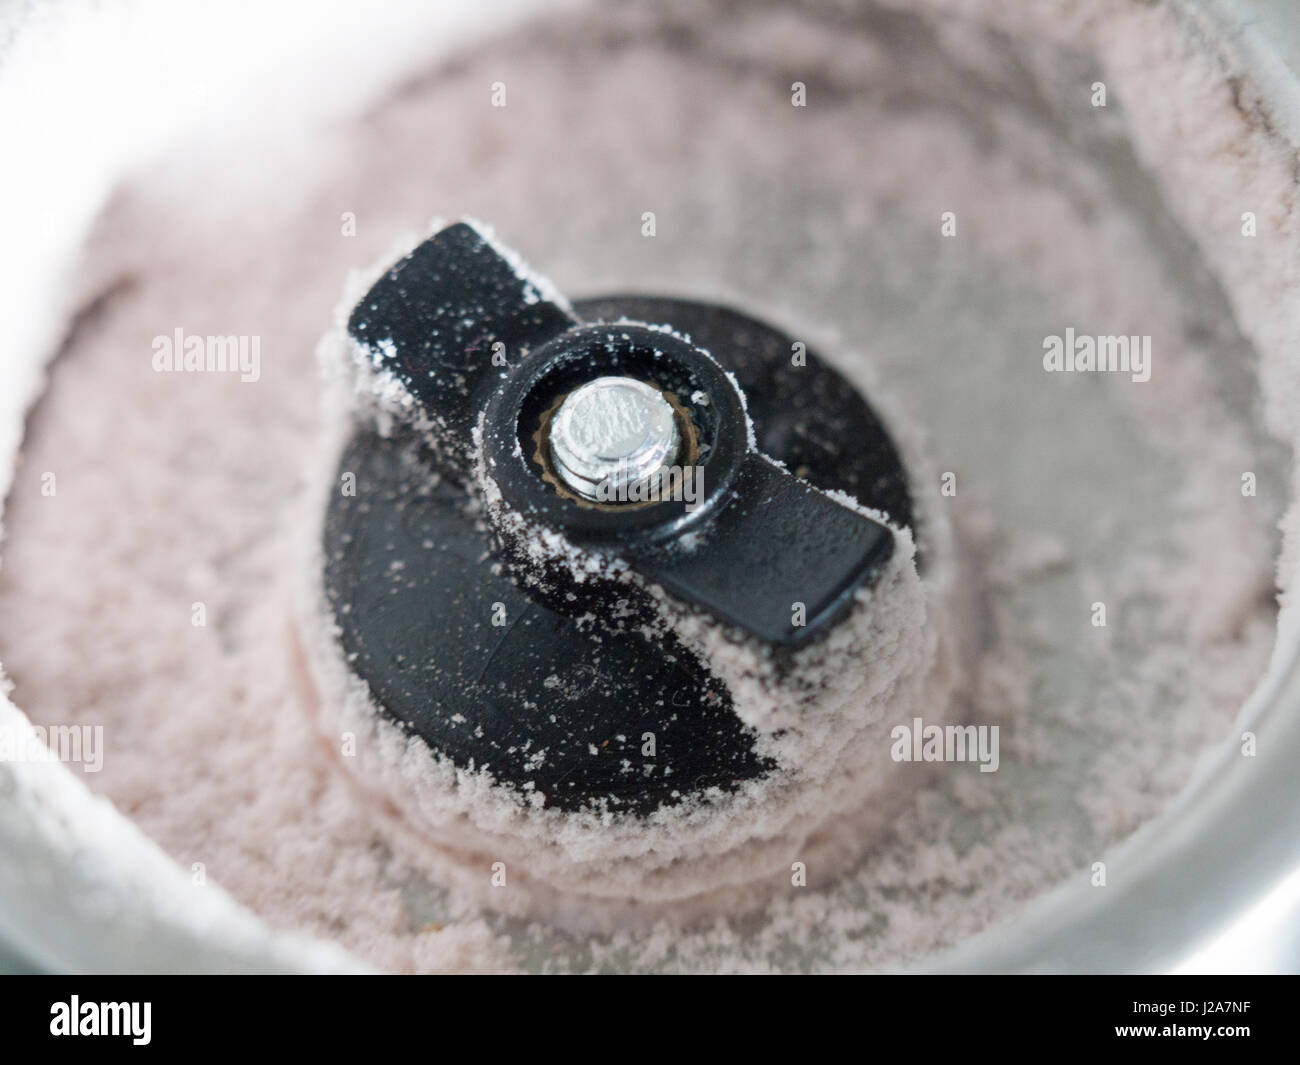 close up macro of the bottom of a salt shaker dispenser with grains of salt in detail Stock Photo